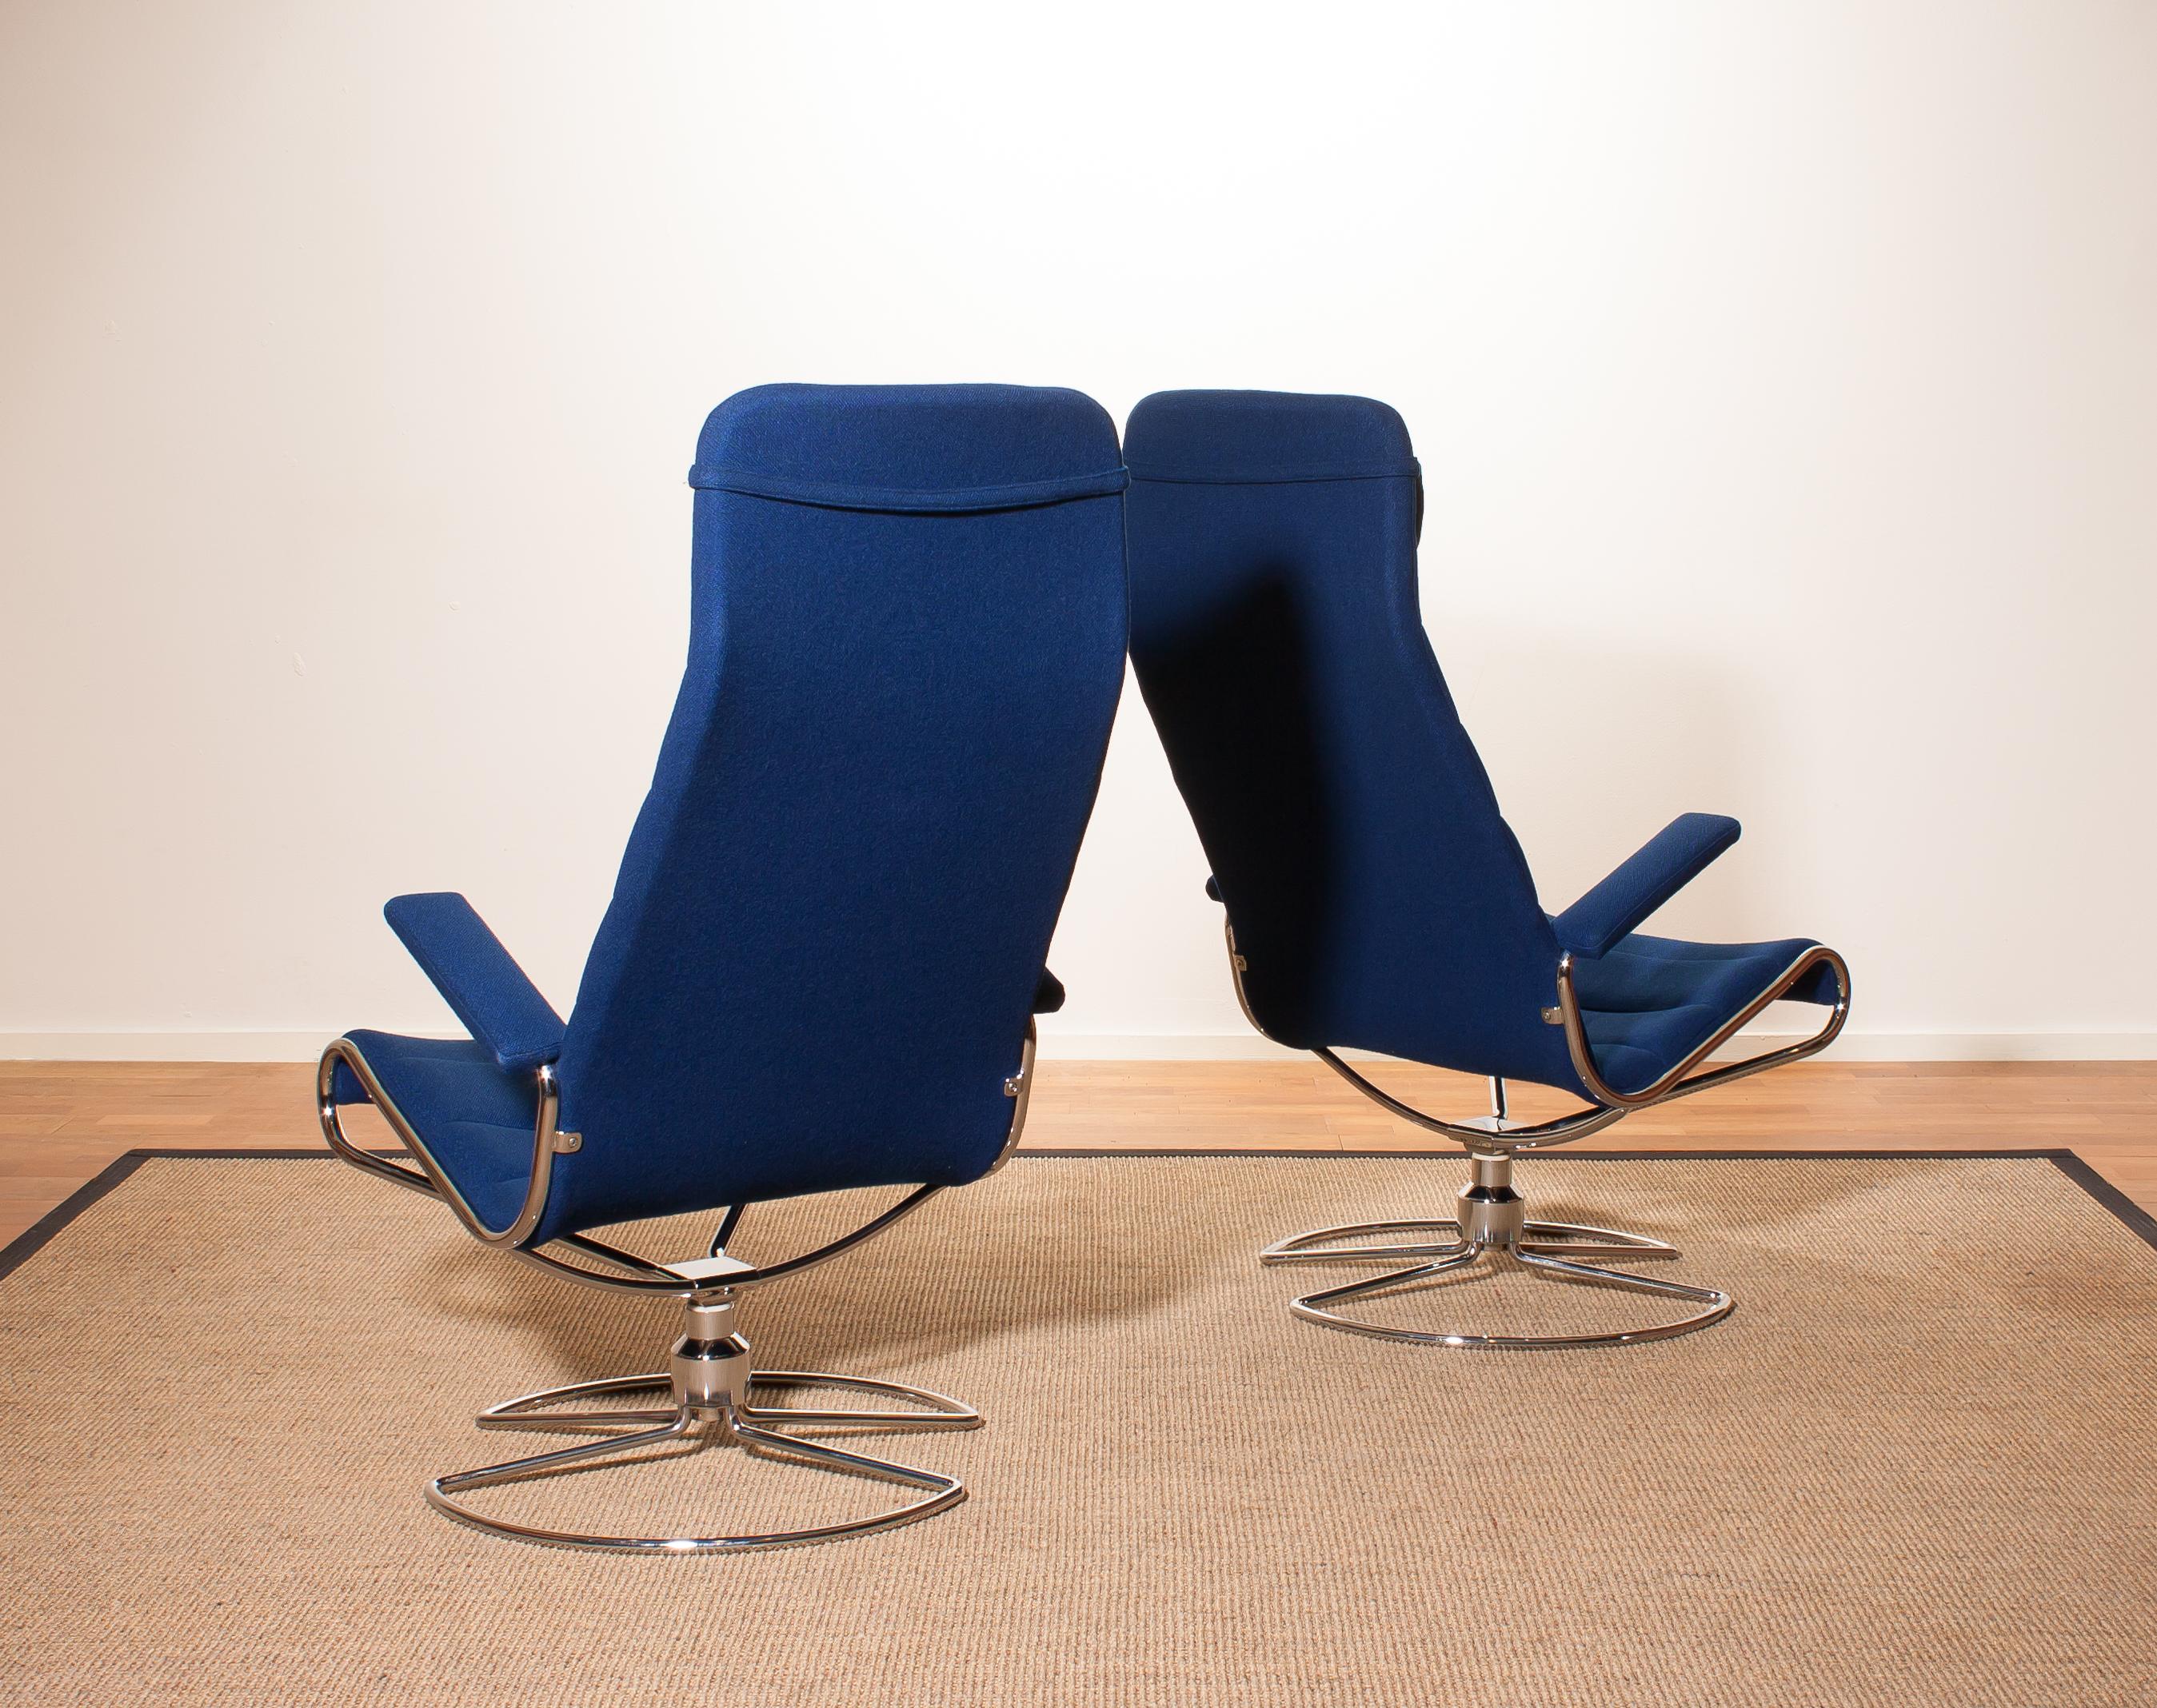 Beautiful 'Minister' chairs designed by Bruno Mathsson.
They are upholstered with a royal blue woollen fabric mounted on a swivel base of tubular chromed steel.
The chairs are in very good condition.
Period 1980s.
Dimensions: H 109 cm, W 60 cm,